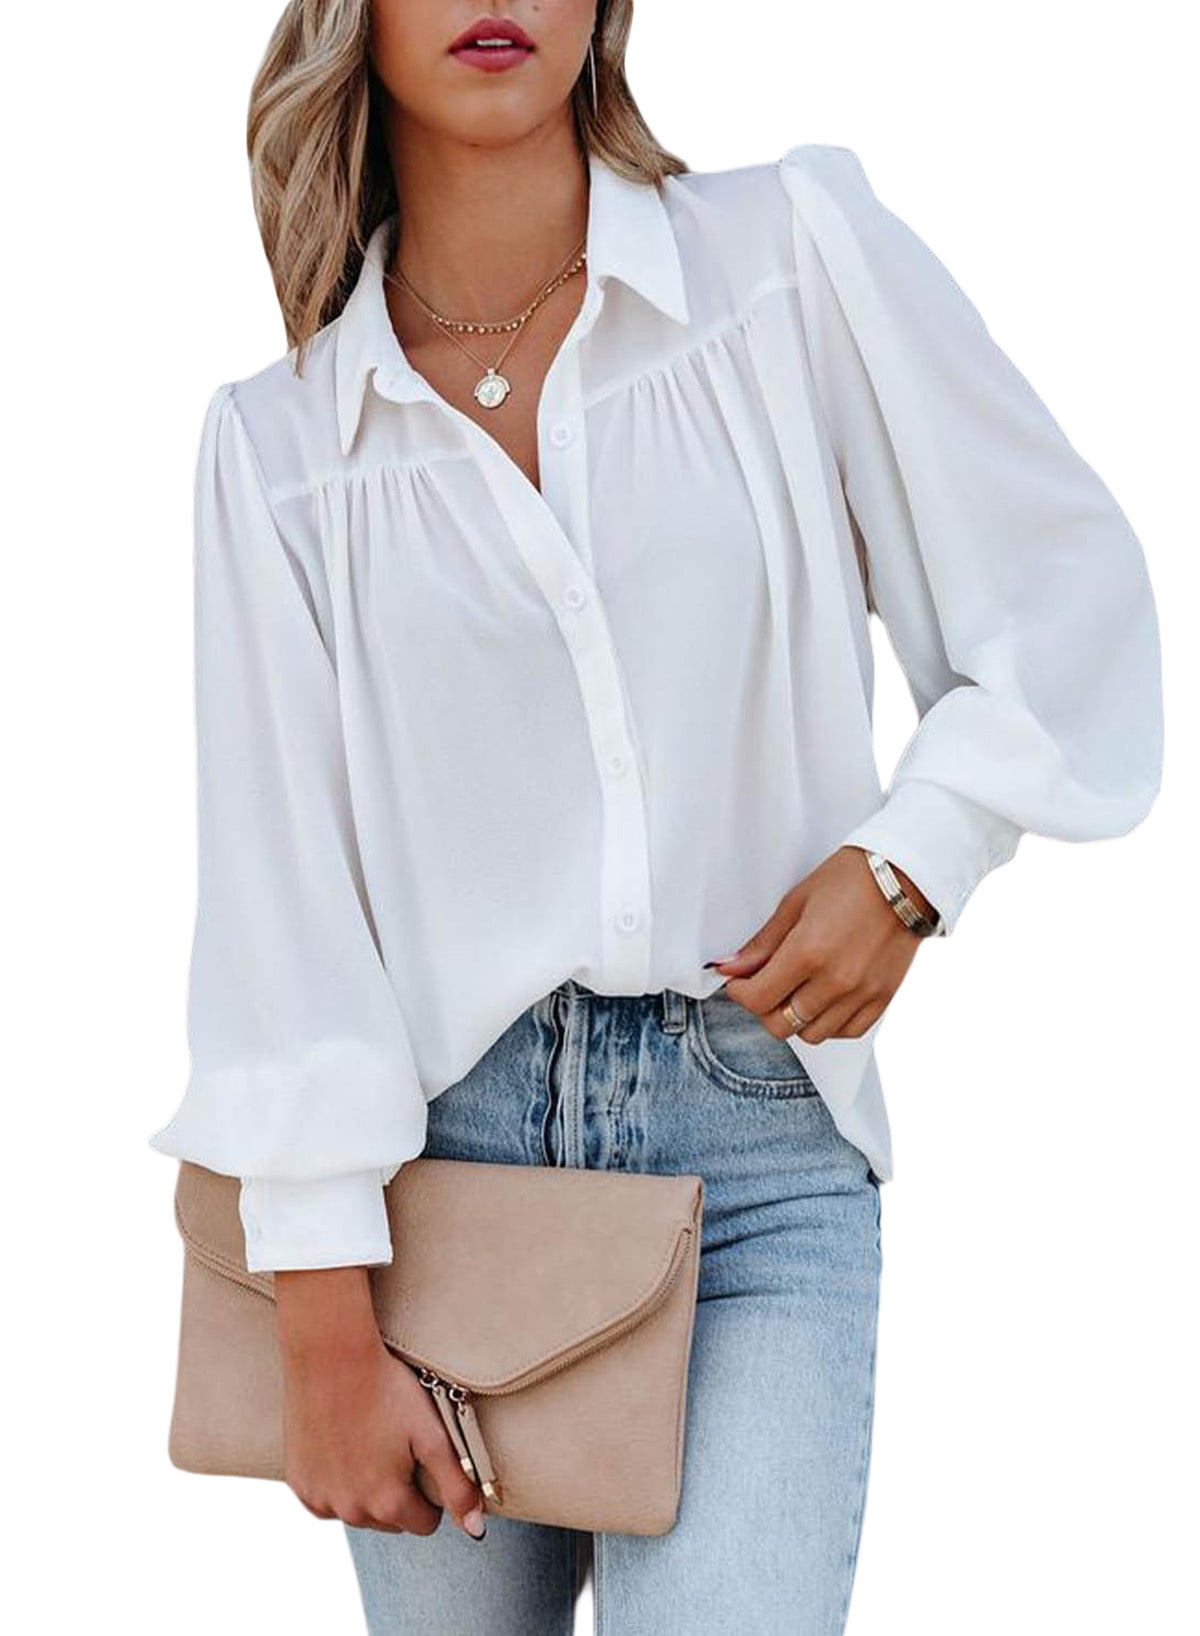 FARYSAYS Long Sleeve White Blouse for Womens Flowy Tops White Button ...